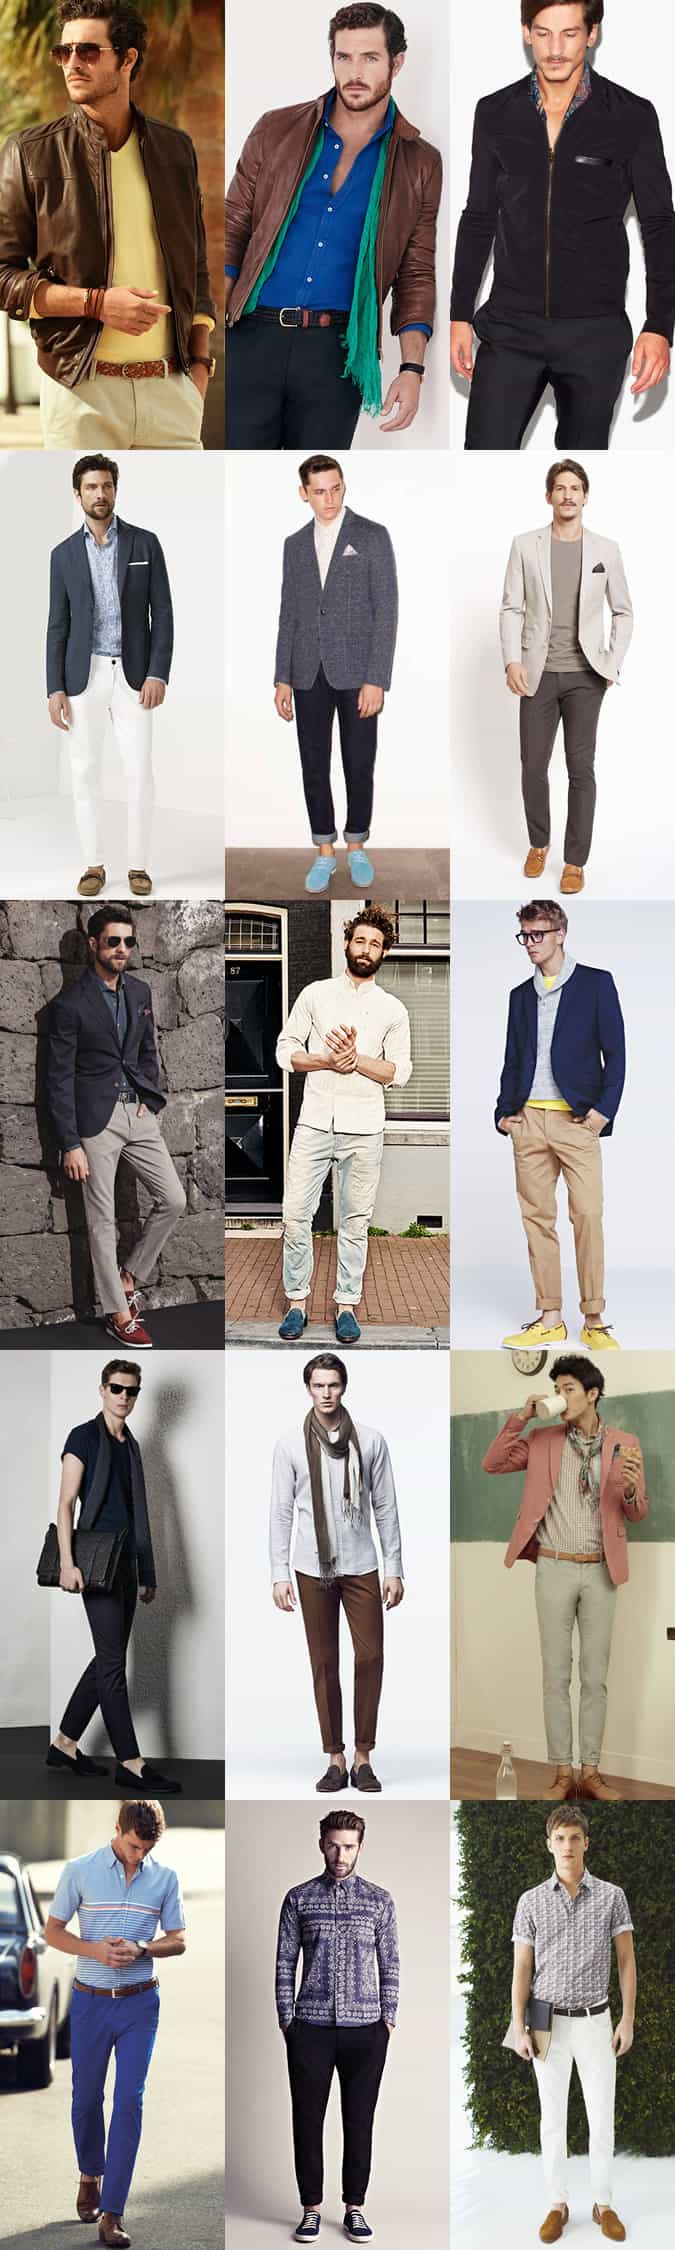 Men's Dress Down Friday Outfit Examples - Using Accents To Individualise Your Look